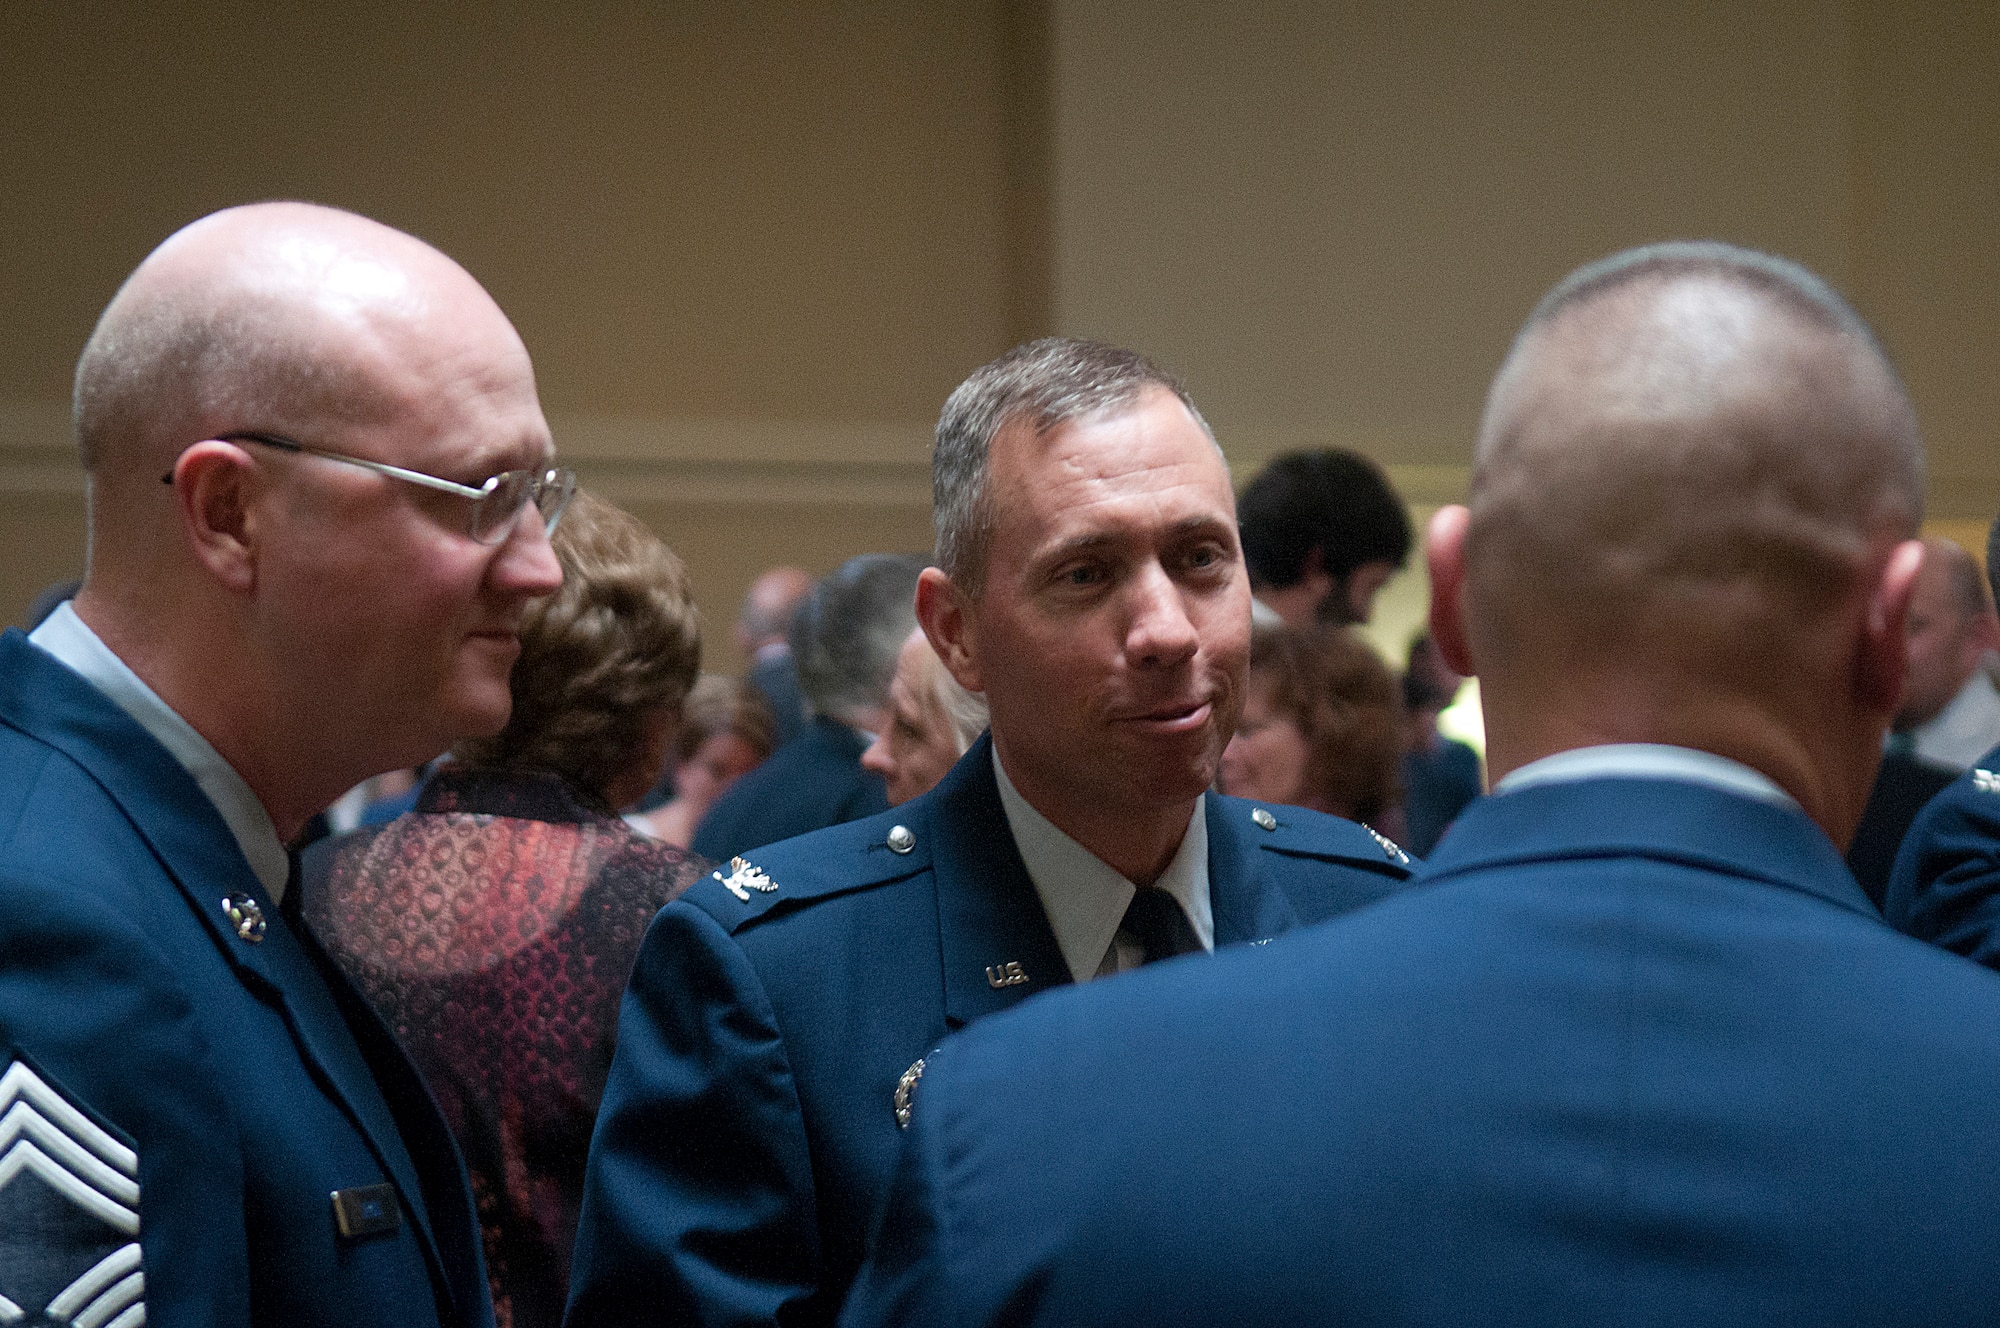 Col. Tom Wilcox, 90th Security Forces Group commander, and Chief Master Sgt. Daniel Arvin, 90th Security Forces Group chief enlisted manager, are among the F. E. Warren Airmen socializing prior to the start of the Air Force Association’s Armed Forces Day Banquet in the Cheyenne Holiday Inn May 18. (U.S. Air Force photo by R.J. Oriez)